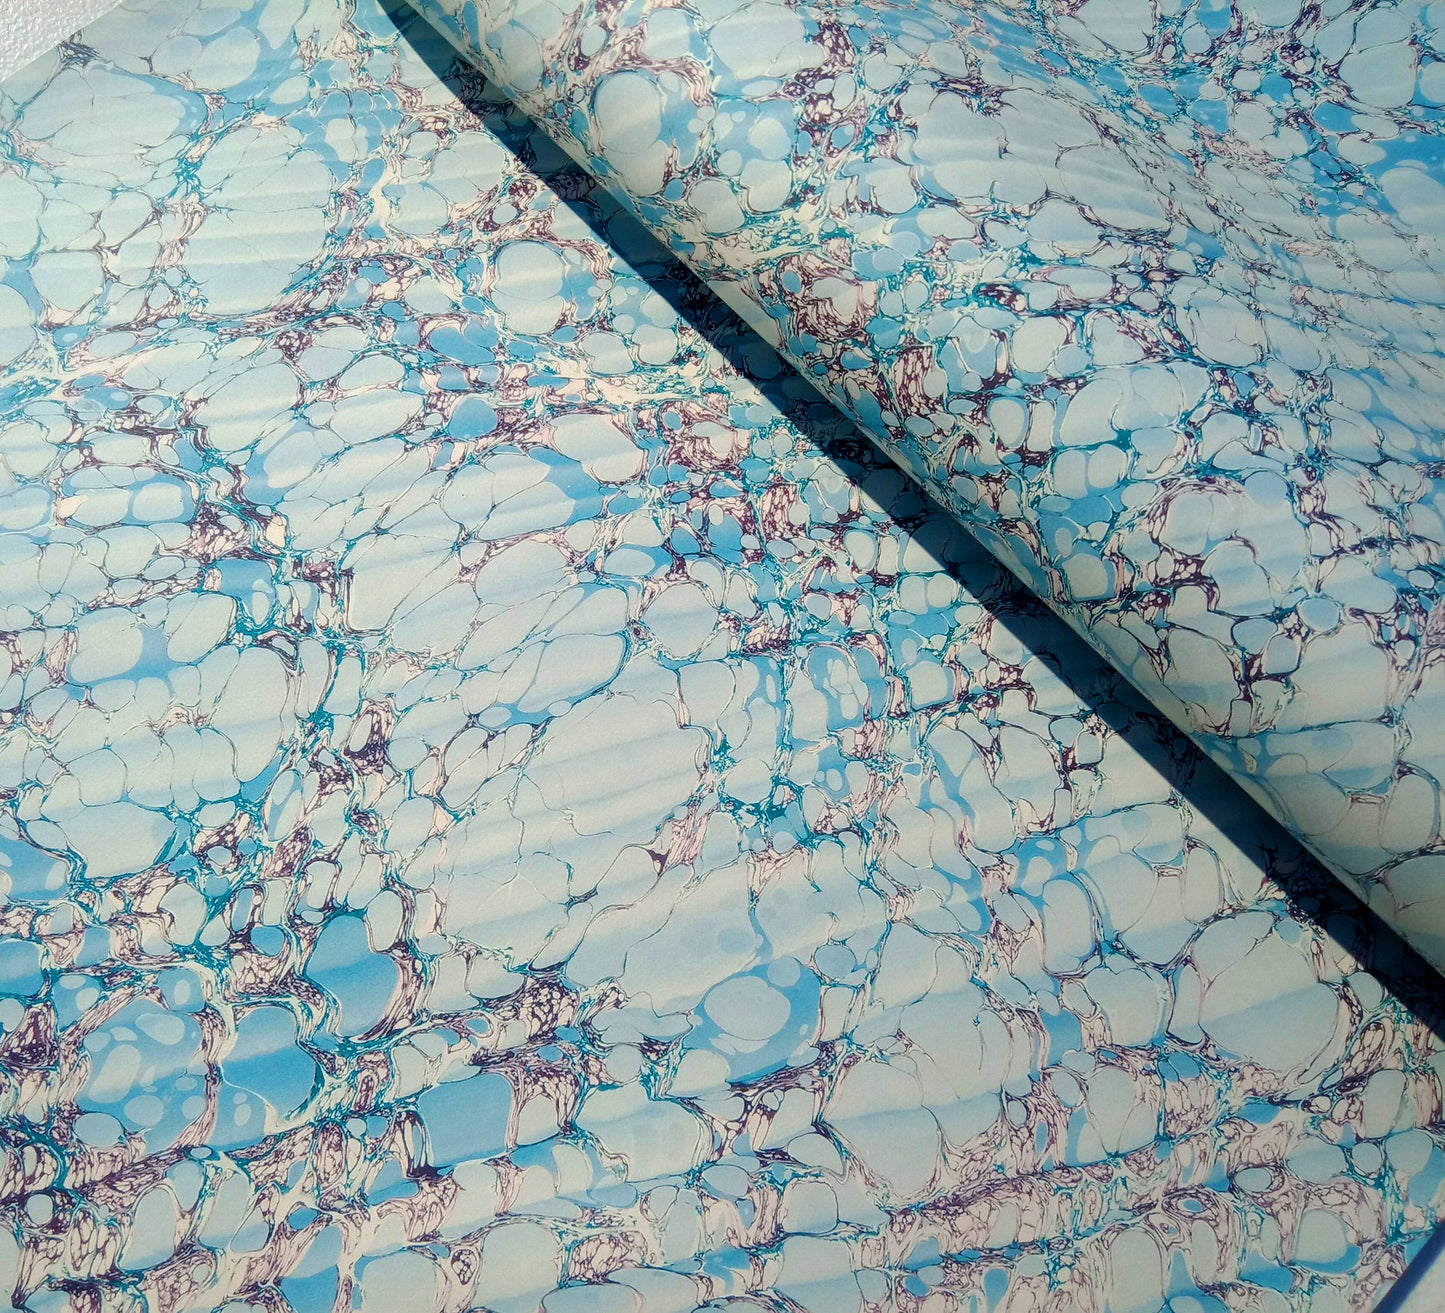 Printed marbled paper- HIGH DEFINITION- THICK 100gsm ACID FREE PAPER- Suitable for book covers and end sheets- TBBPM6